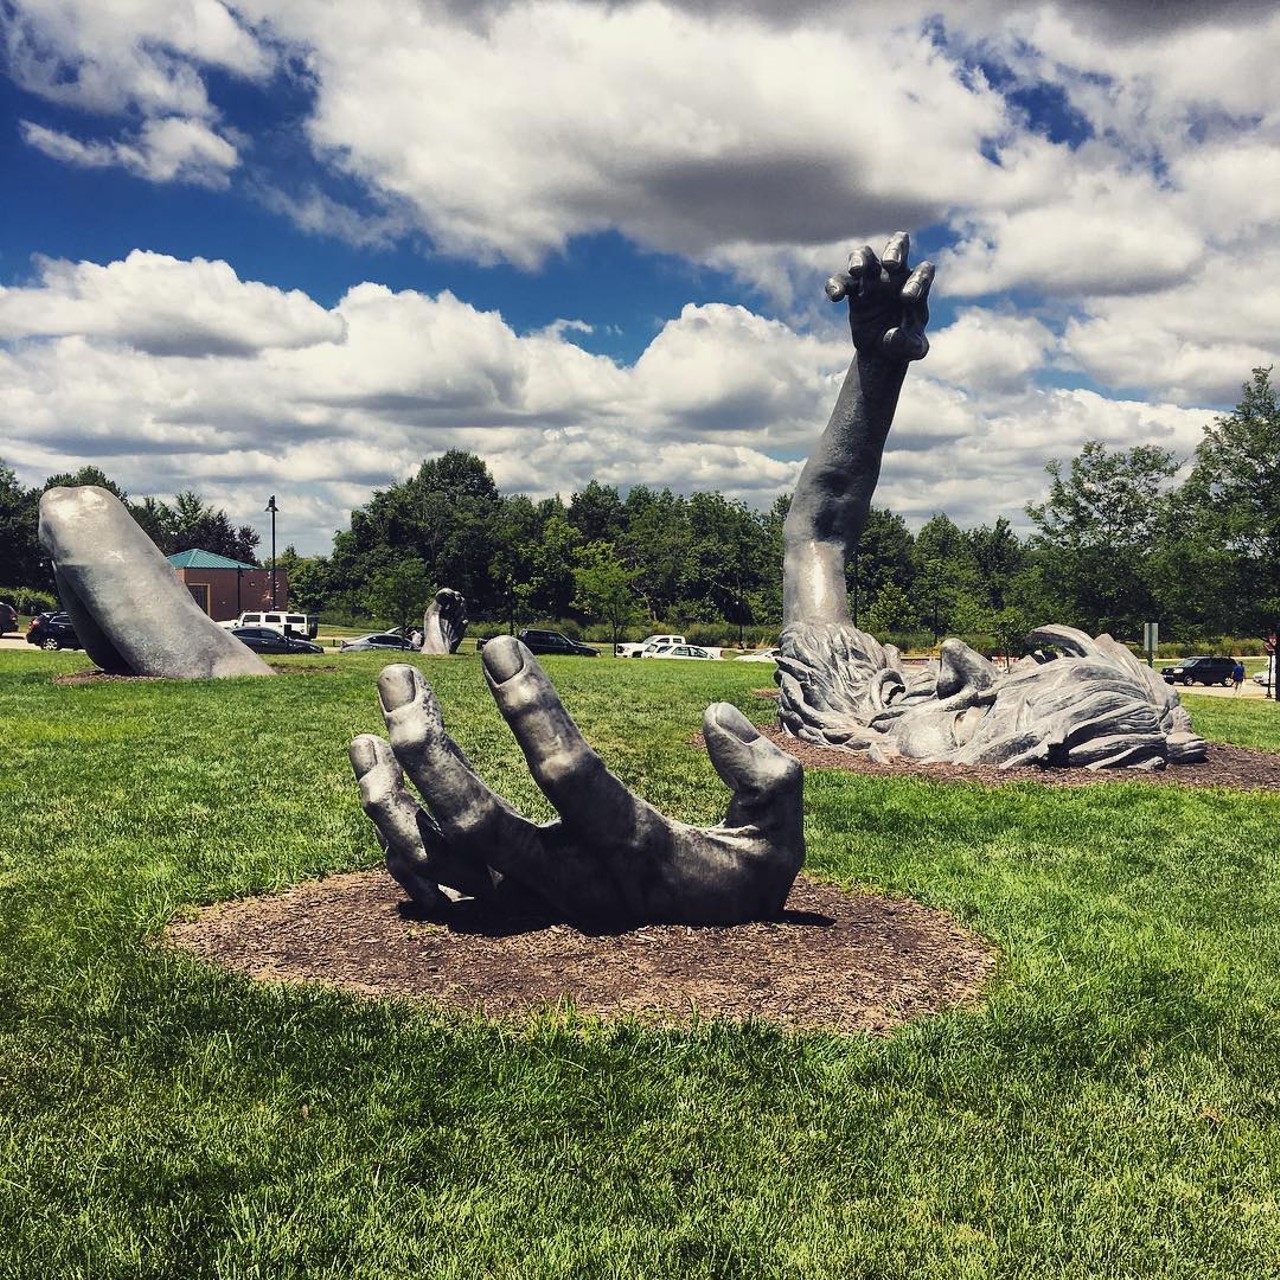 The Awakening - Buried Giant
16150 Park Circle, Chesterfield, MO
This sculpture by J. Seward Johnson is supposed to be of a giant crawling out of the ground. It lives right behind Chesterfield Mall and it's huge, weirdly stressful and tons of fun to climb on.
Photo courtesy of jkinzy / Instagram